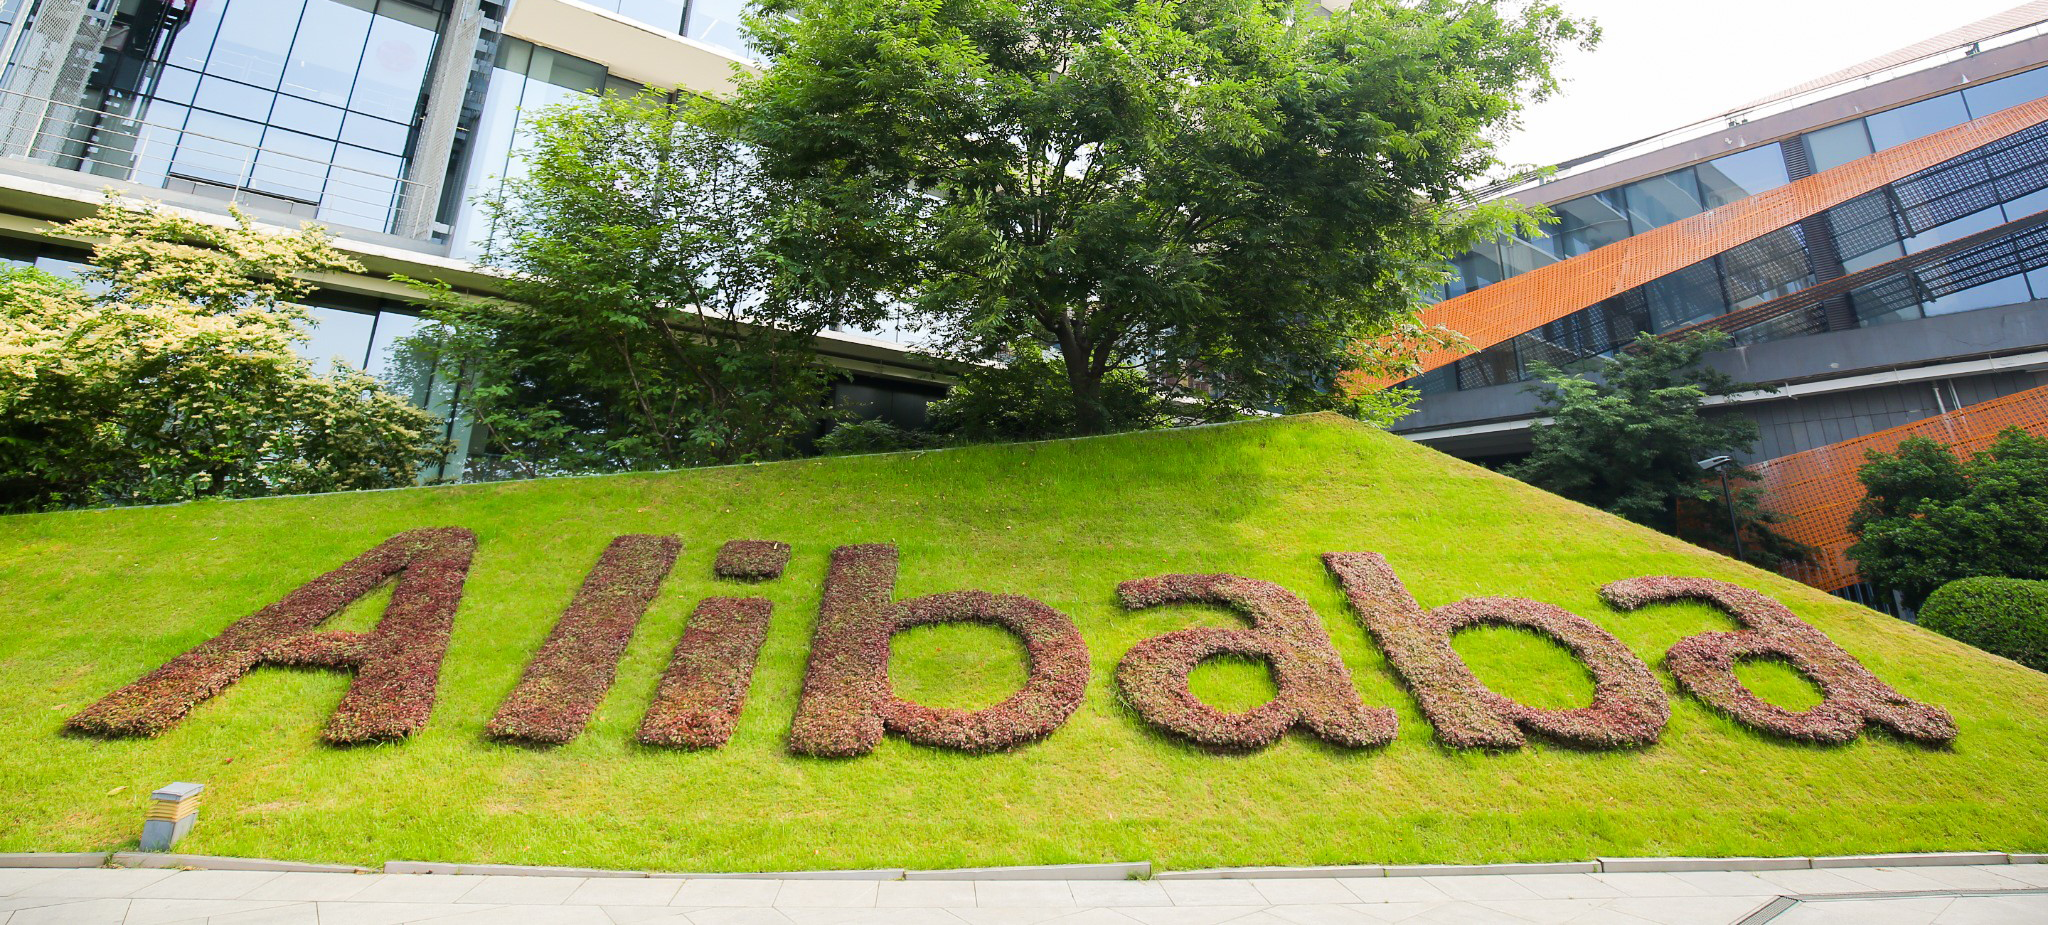 Alibaba adds fresh AI startup to its investing portfolio amid increasing bets in the sector